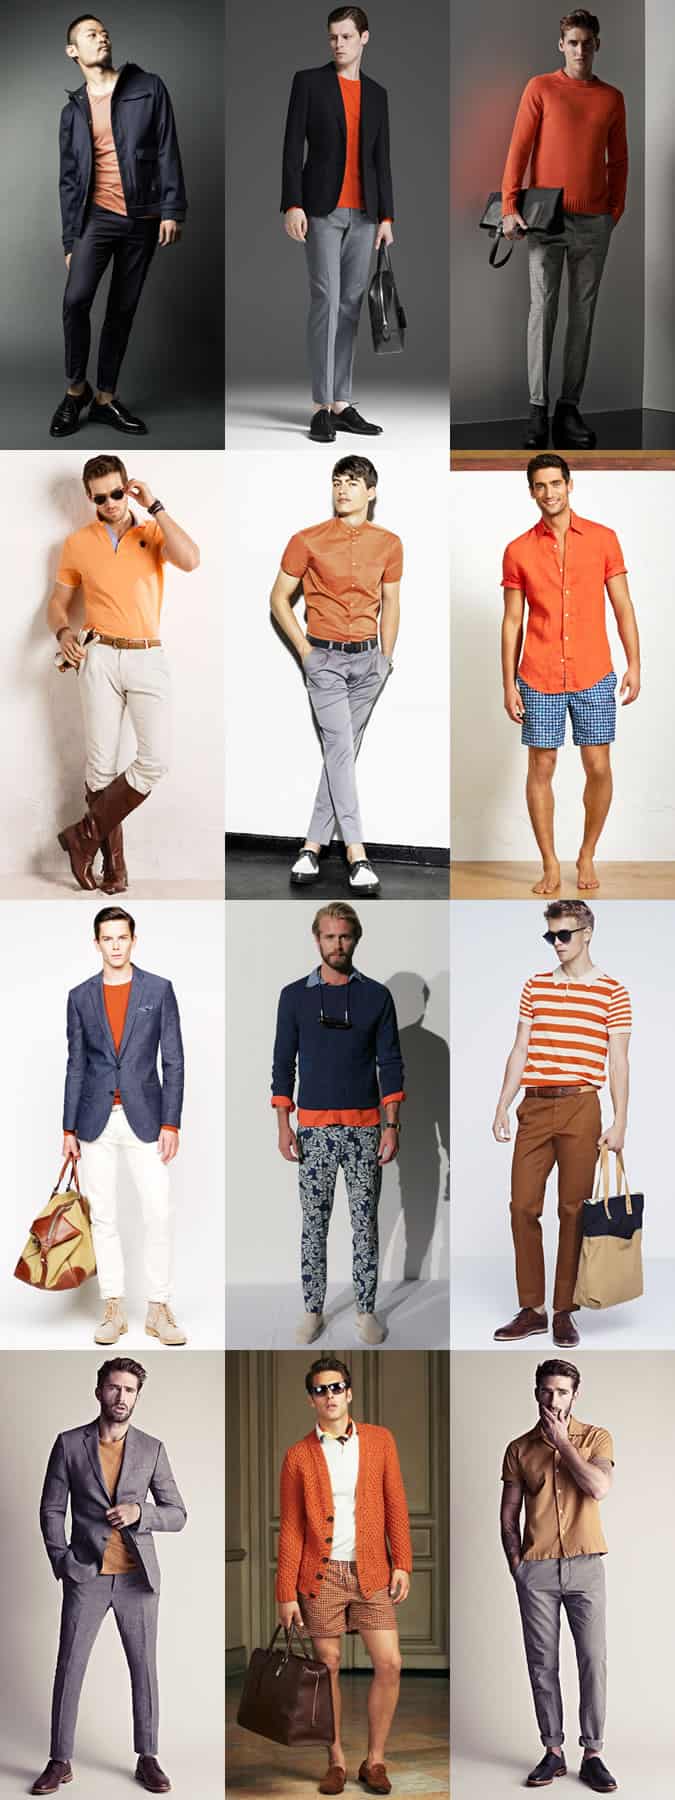 Men's Orange Shirts, T-Shirts, Polo Shirts and Knitwear Outfit Inspiration Lookbook